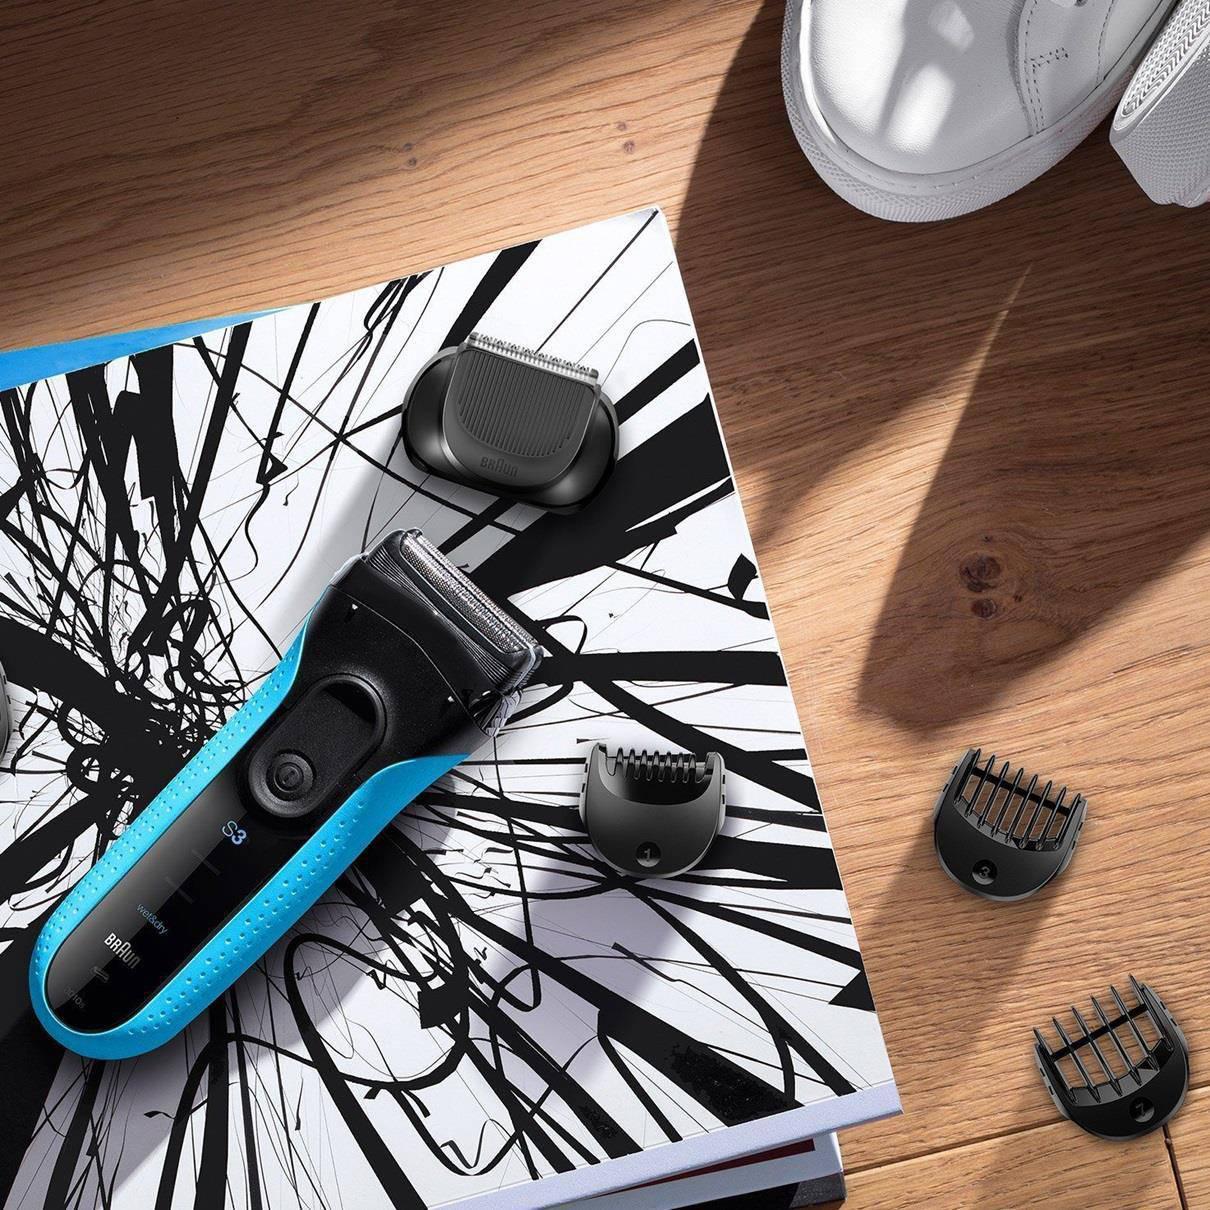 Braun Series 3 Shave & Style 3010BT 3-in-1 Electric Shaver with Precision Trimmer - Healthxpress.ie